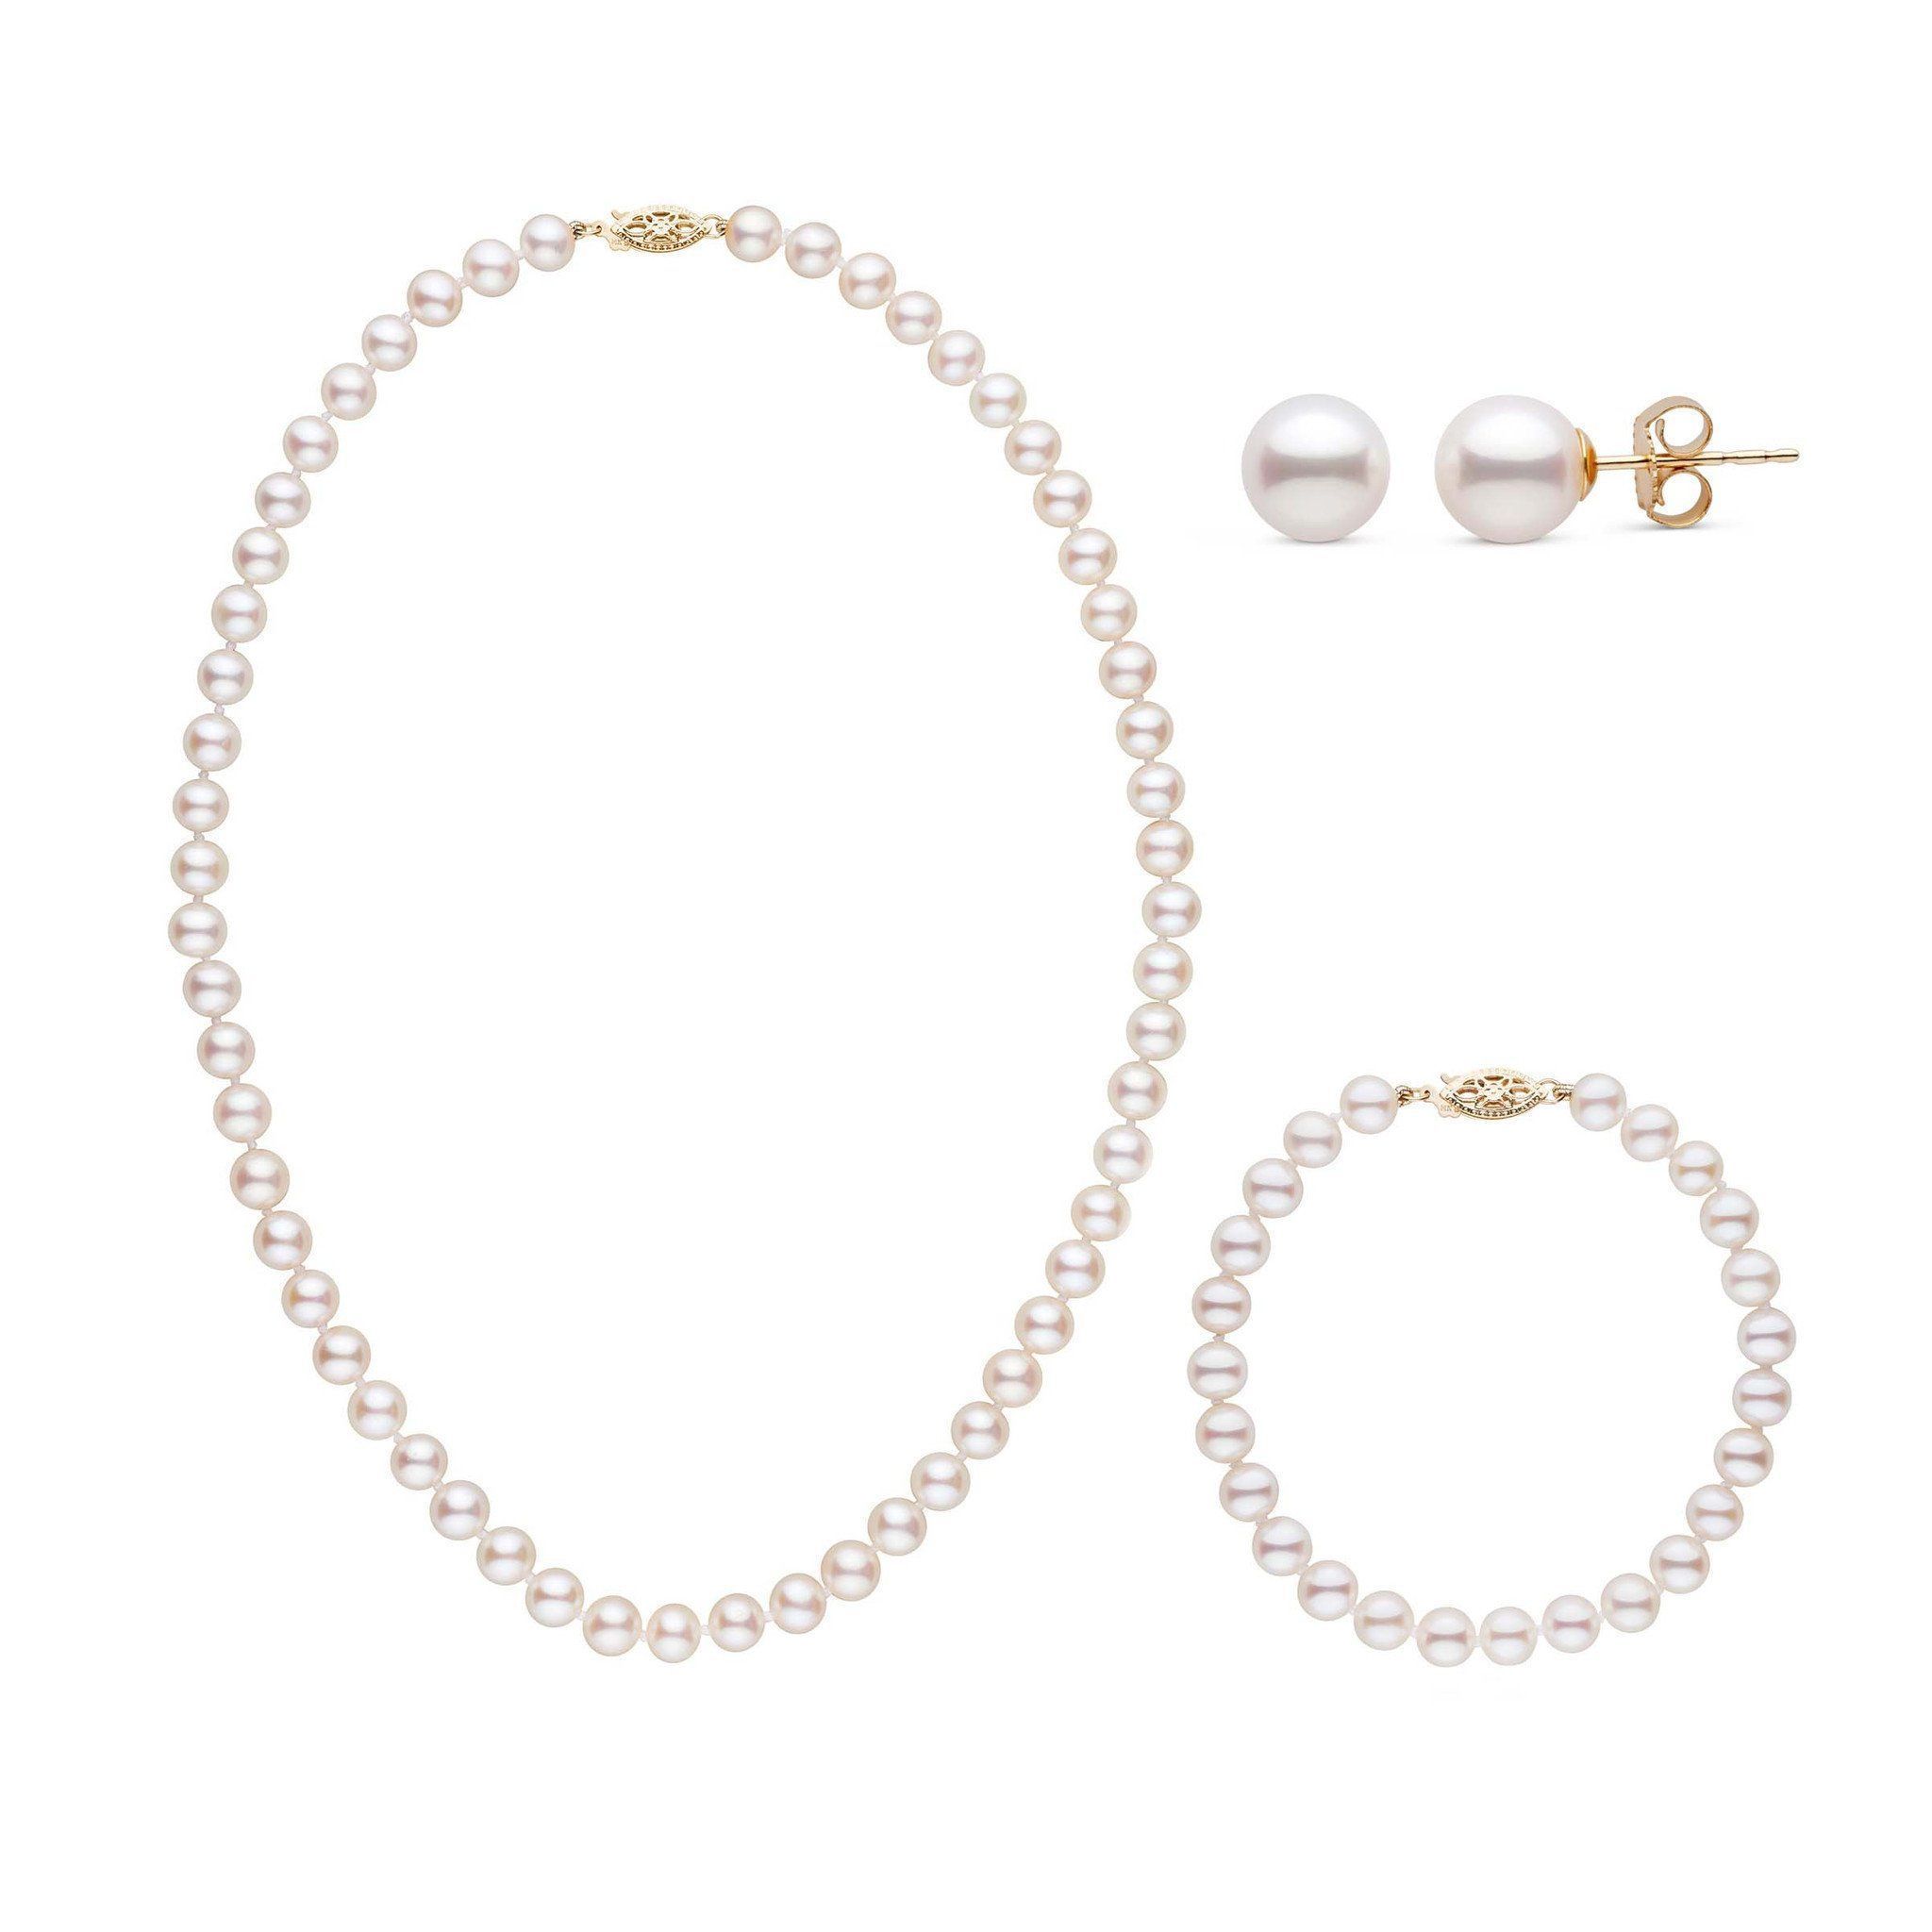 16 Inch 3 Piece Set of 6.5-7.0 mm AAA White Freshwater Pearls yellow gold